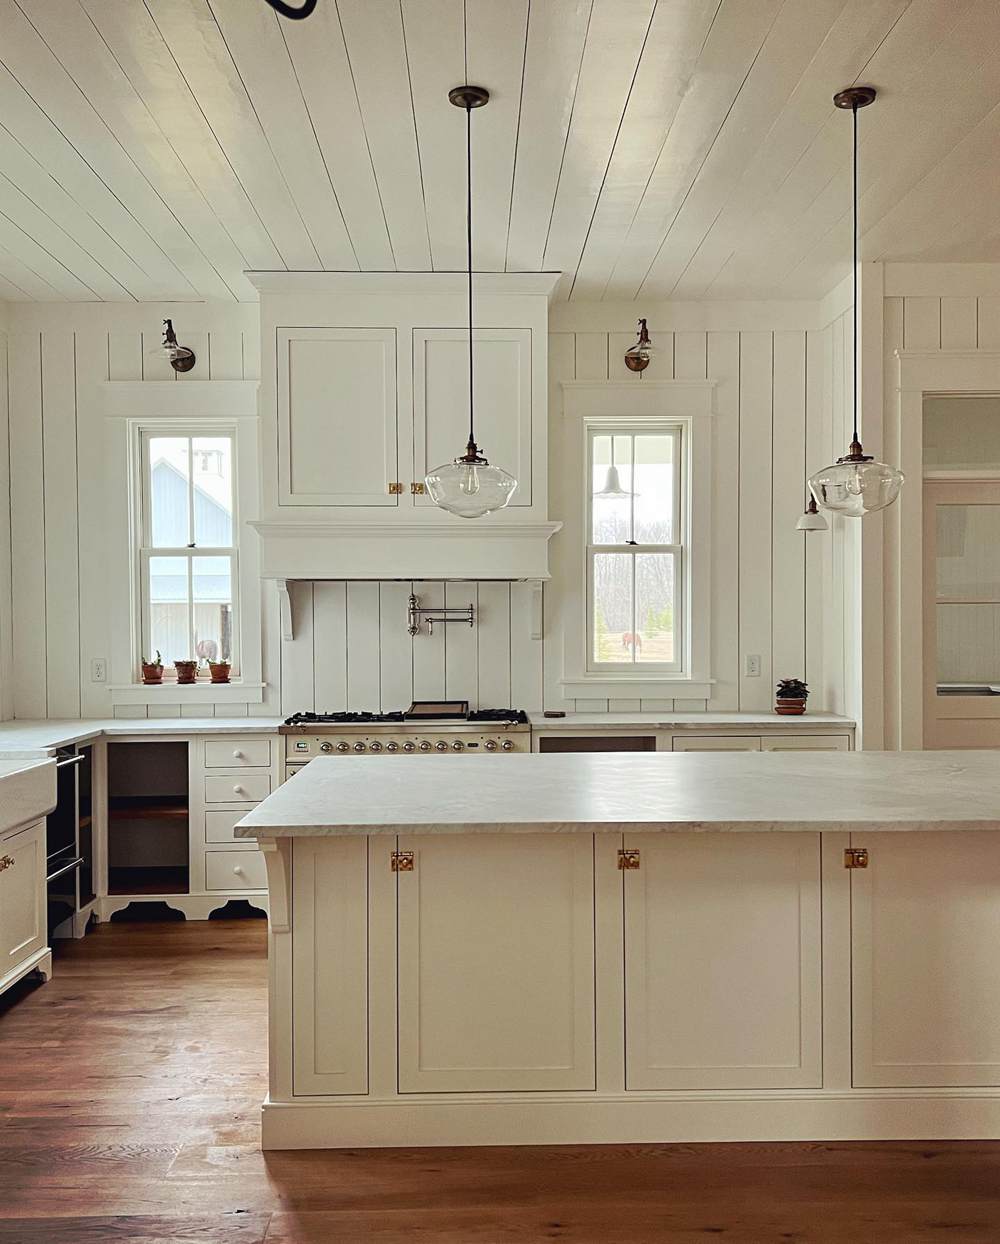 Simply White on Cabinets